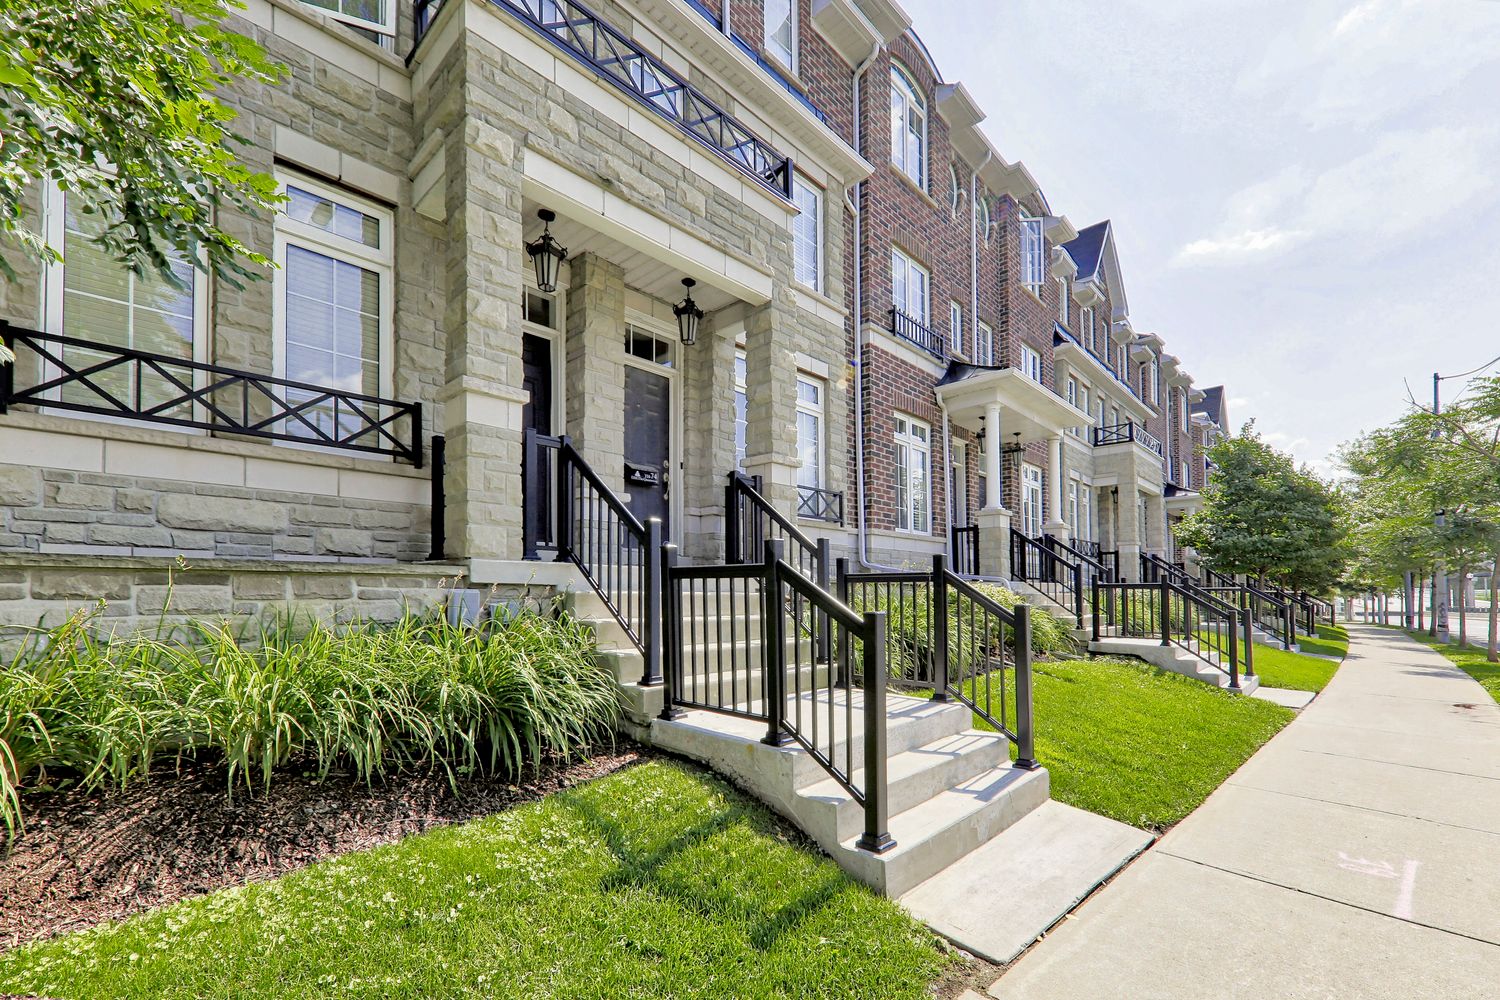 8 Windermere Avenue. Windermere by The Lake Townhomes is located in  West End, Toronto - image #2 of 4